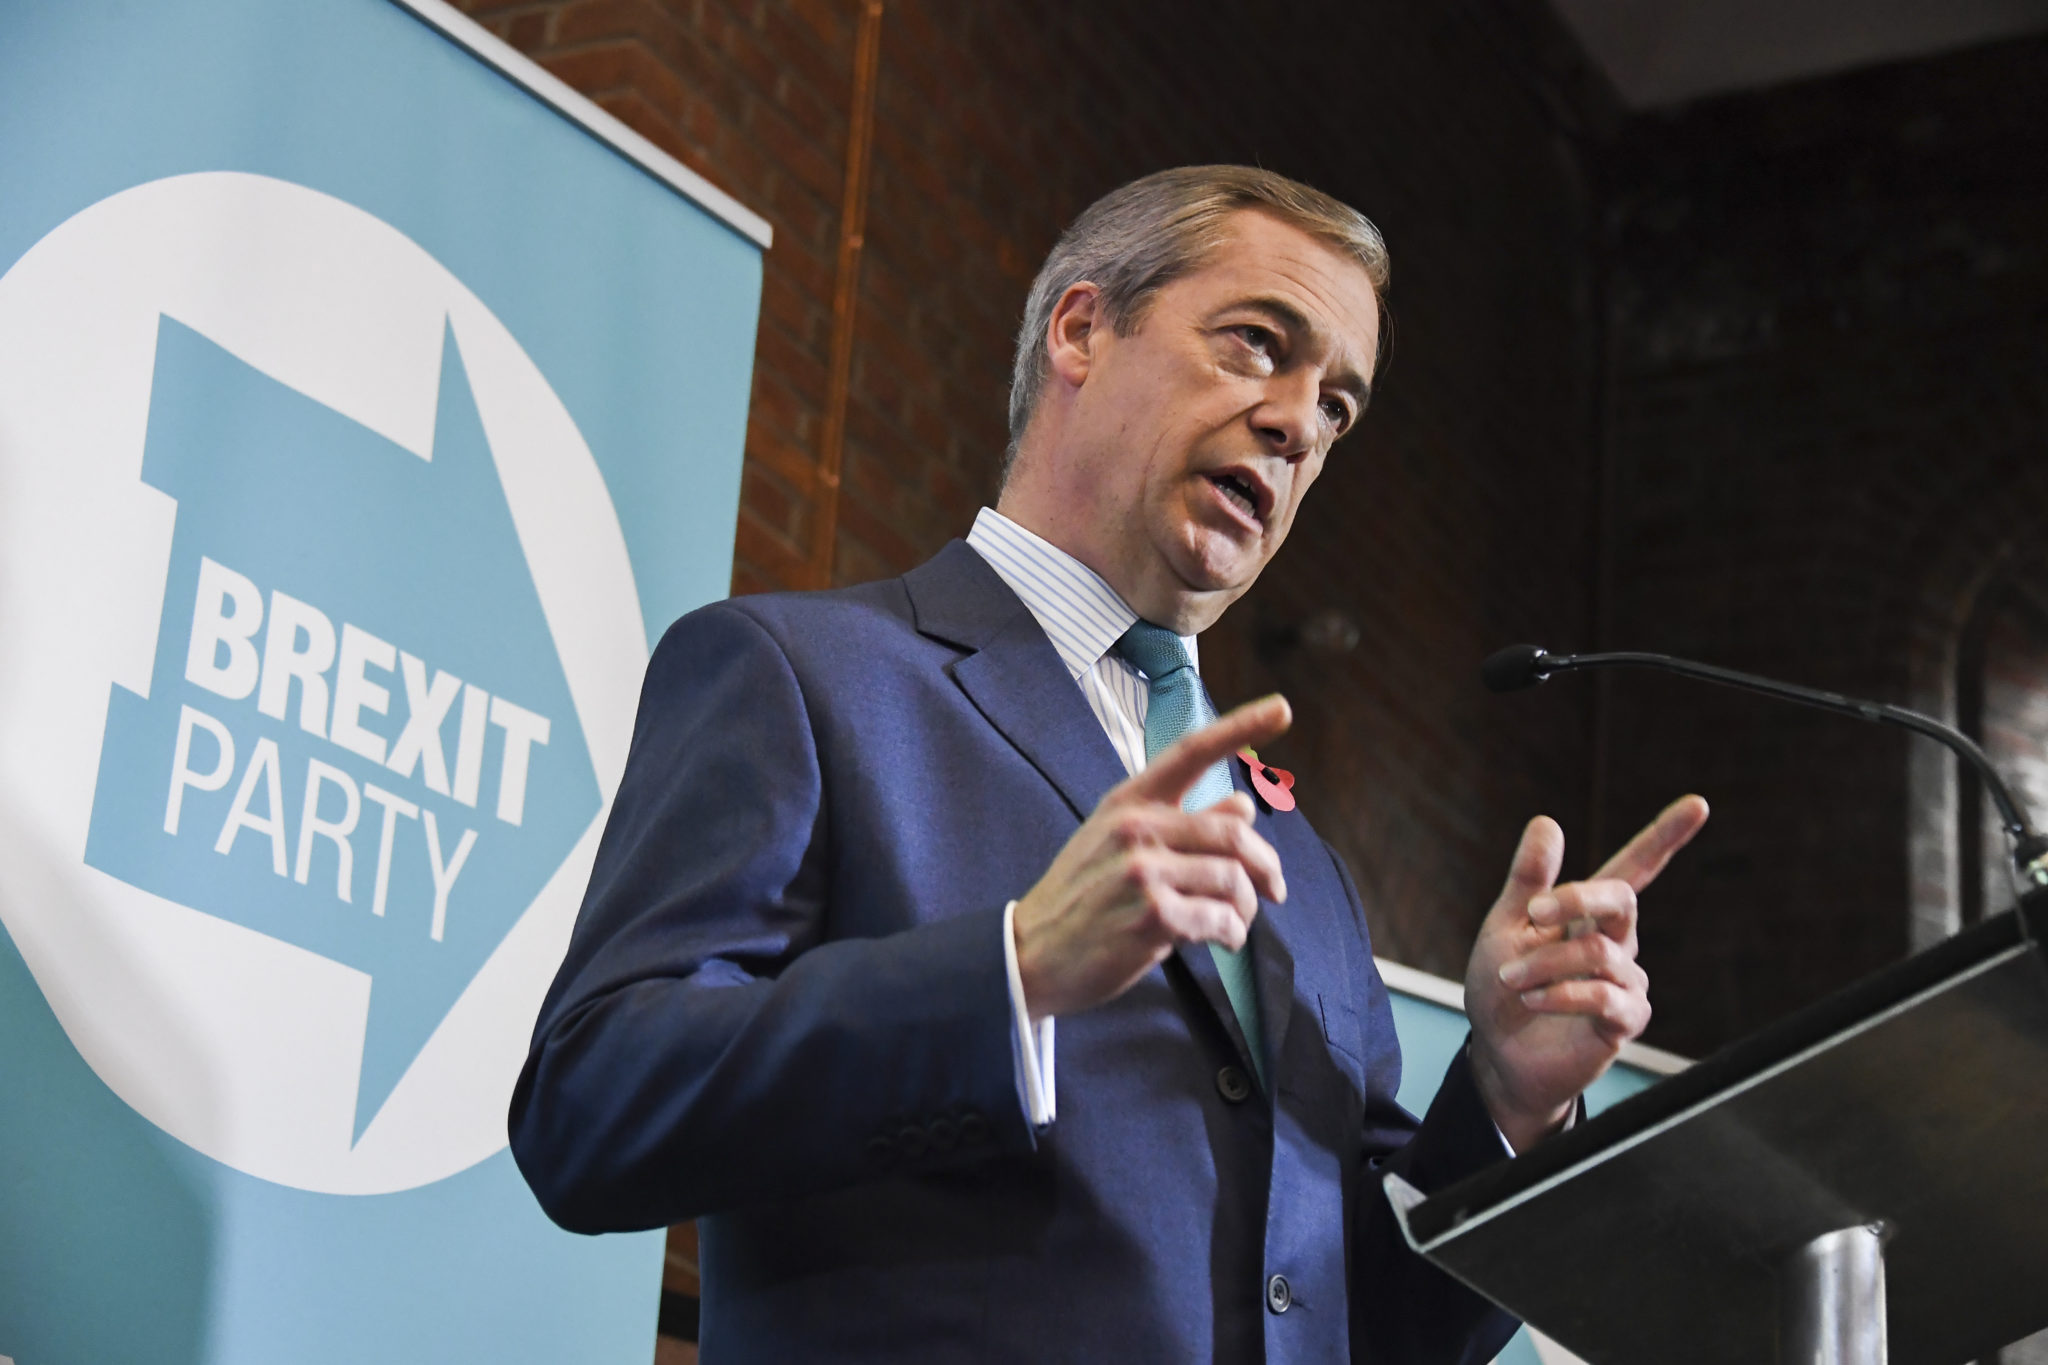 Brexit Party leader Nigel Farage launches his party's manifesto ahead of the General Election, 01-11-2019. Image: Alberto Pezzali/AP/Press Association Images